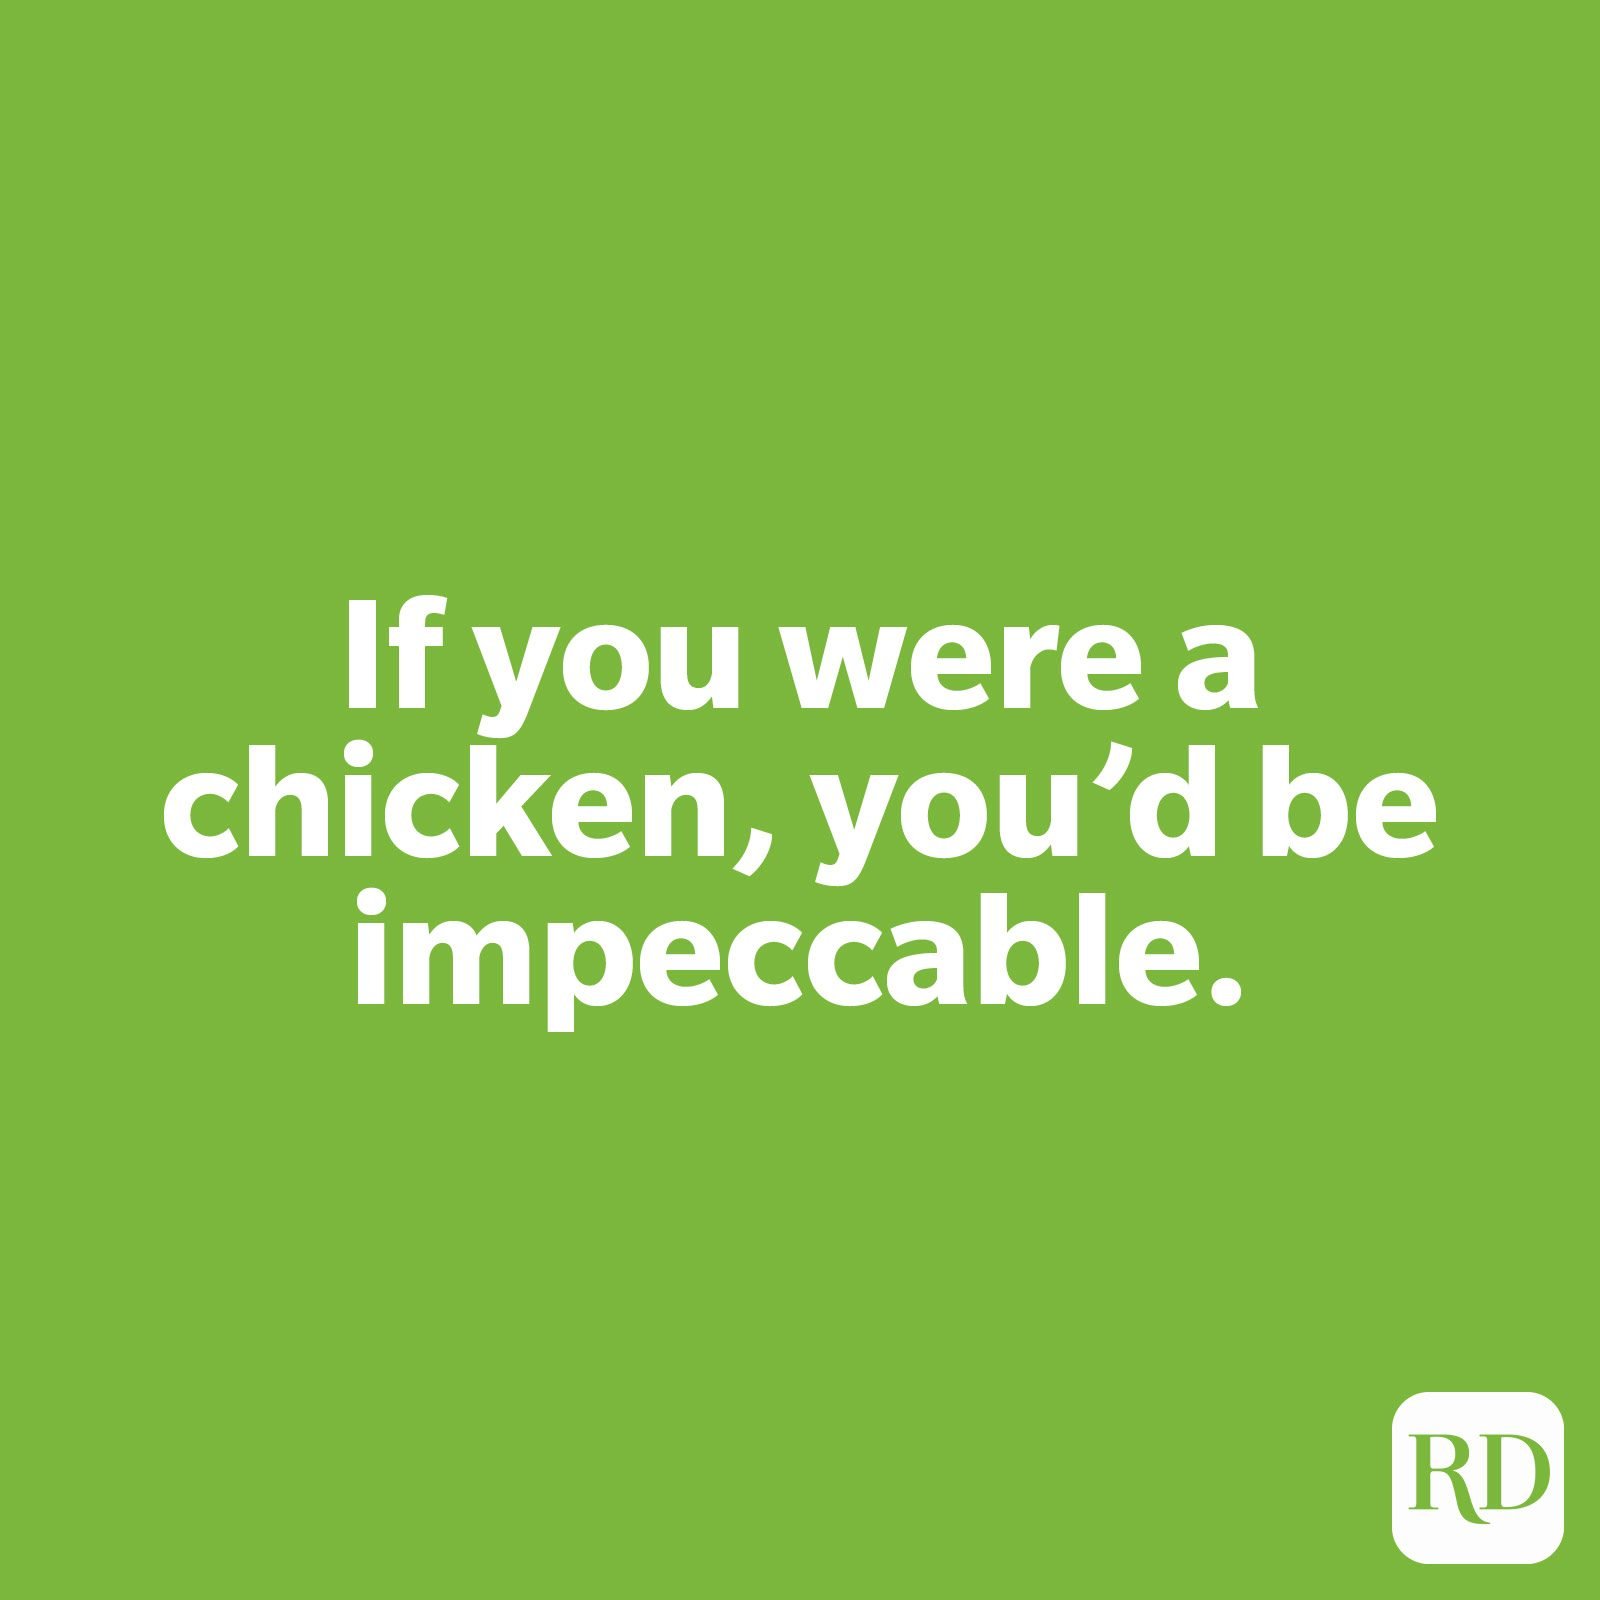 If you were a chicken, you'd be impeccable.